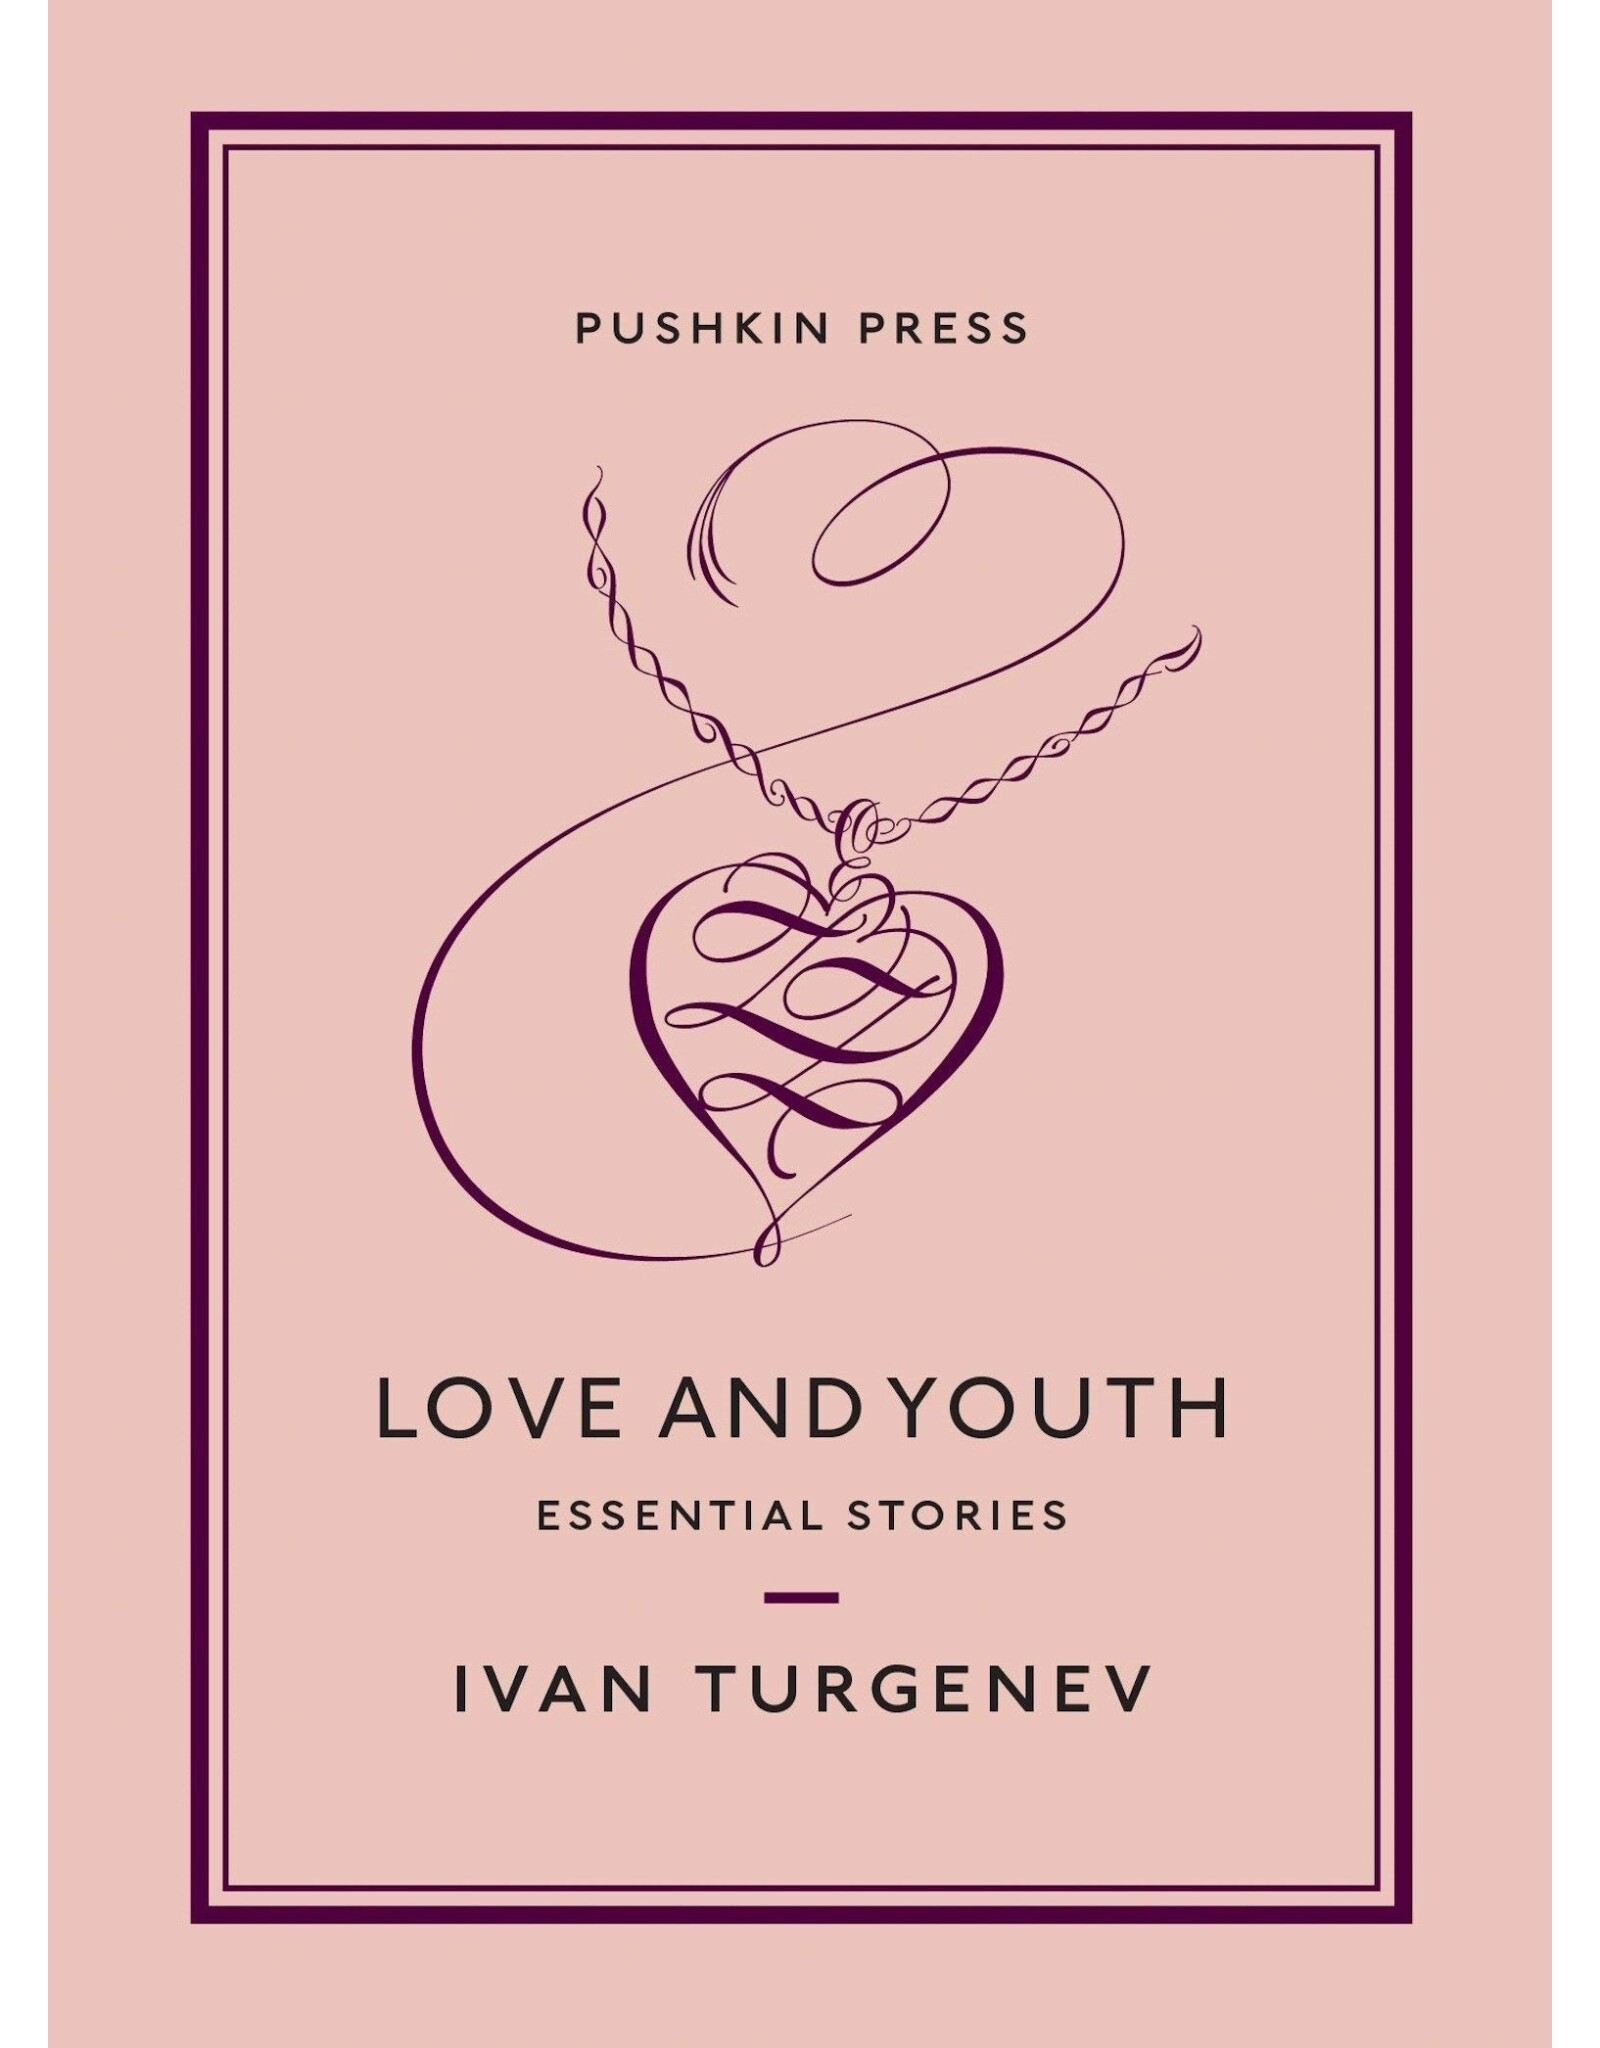 Love and Youth: Ivan Turgenev Essential Stories